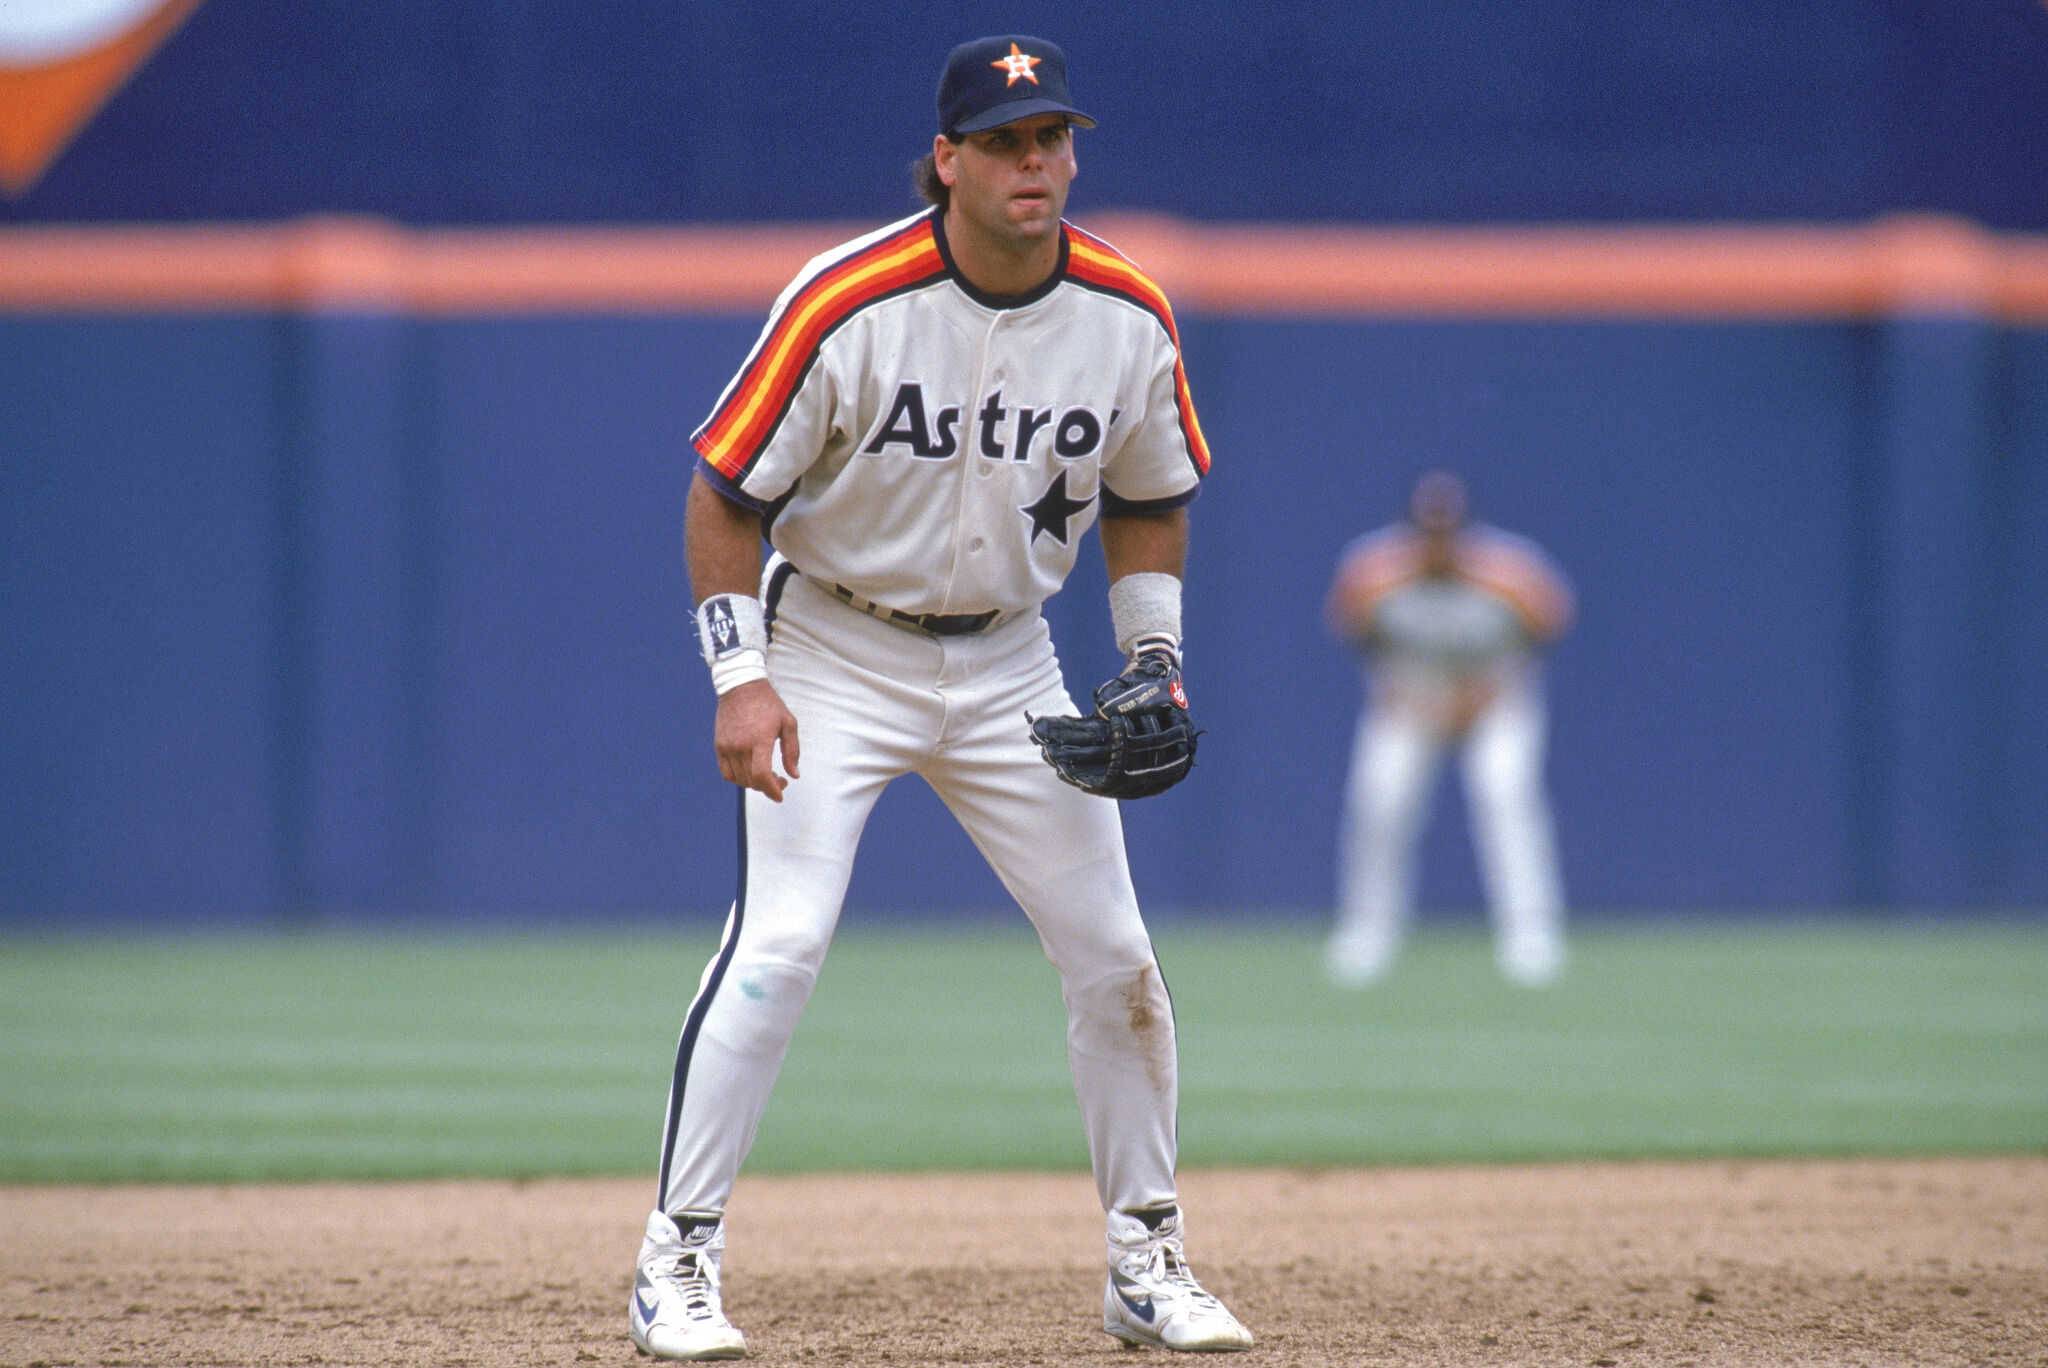 Astros Fans Salute Clemens for No. 348